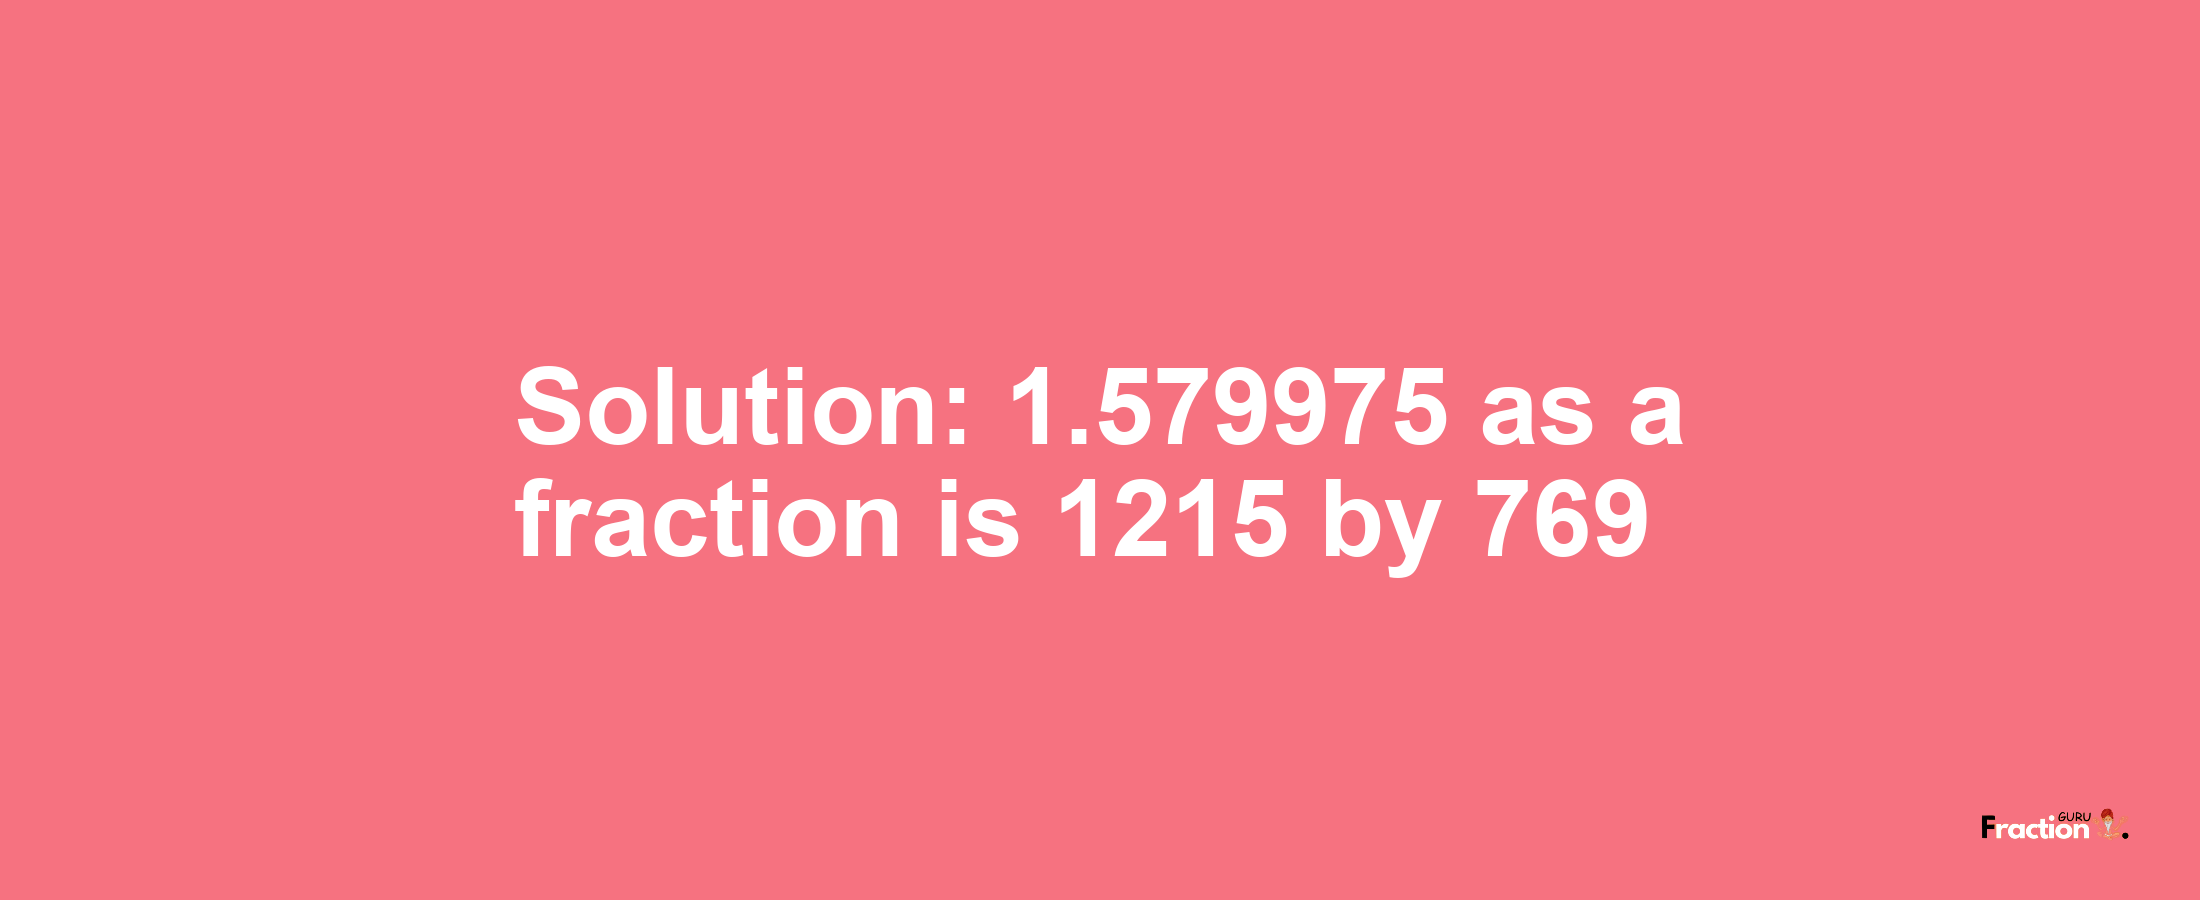 Solution:1.579975 as a fraction is 1215/769